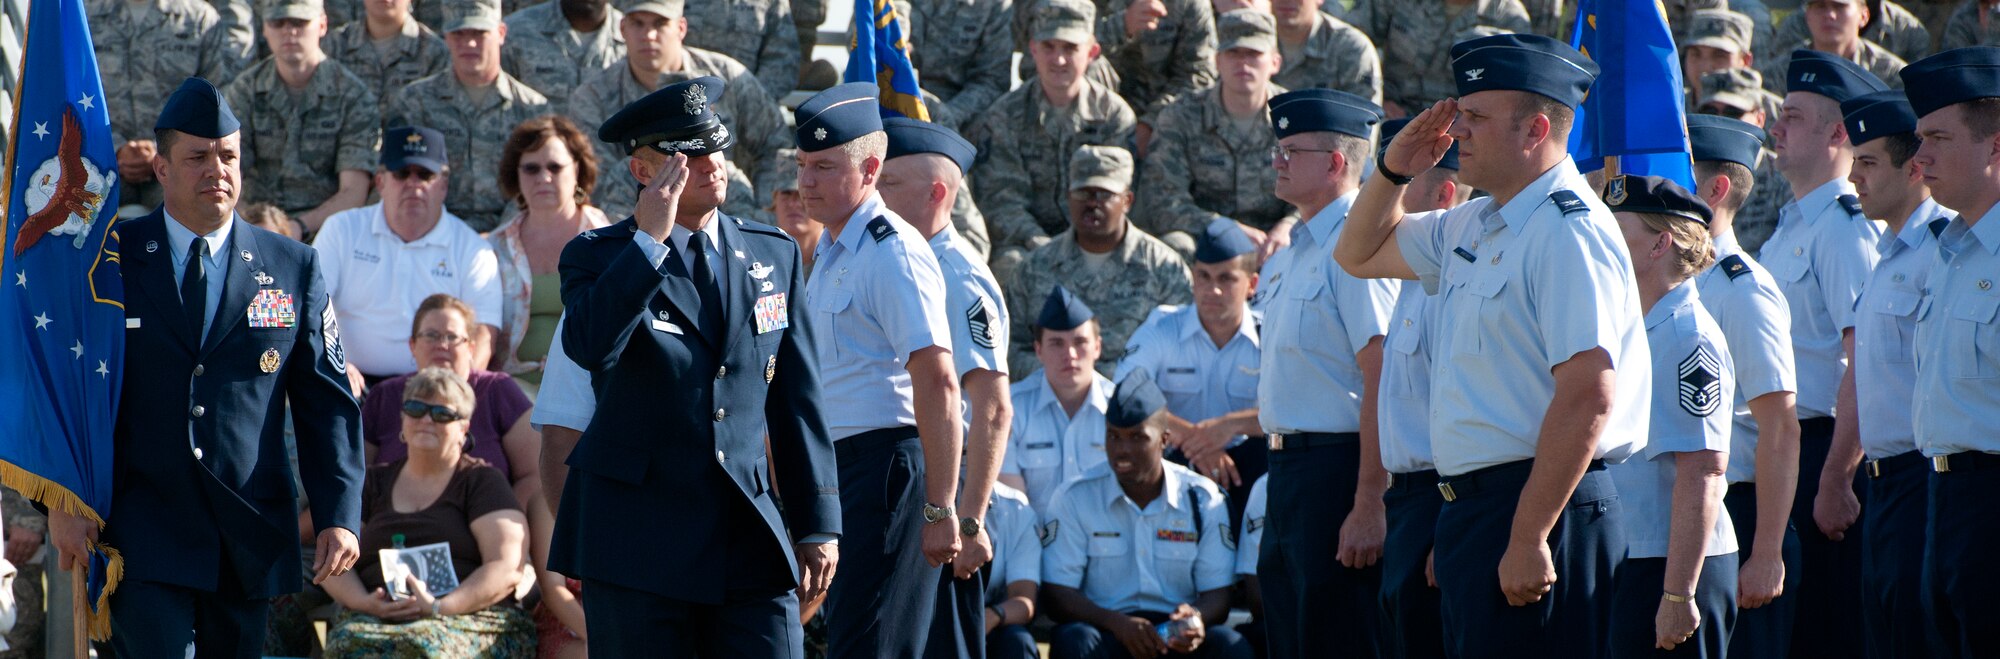 ALTUS AIR FORCE BASE, Okla. -- Col. Anthony B. Krawietz, 97th Air Mobility Wing commander, salutes the members of Altus AFB during the review of troops as part of the 97th AMW change of command ceremony at Wings of Freedom Park, June 27. It is customary for the senior officer to review the Airmen, but Gen. Edward A. Rice Jr., commander of Air Education and Training Command, deferred the honor to Krawietz. The review consisted of four stages: a formation of troops, presentation and honors, inspection, and a march in review. (U.S. Air Force photo by Senior Airman Jesse Lopez / Released)